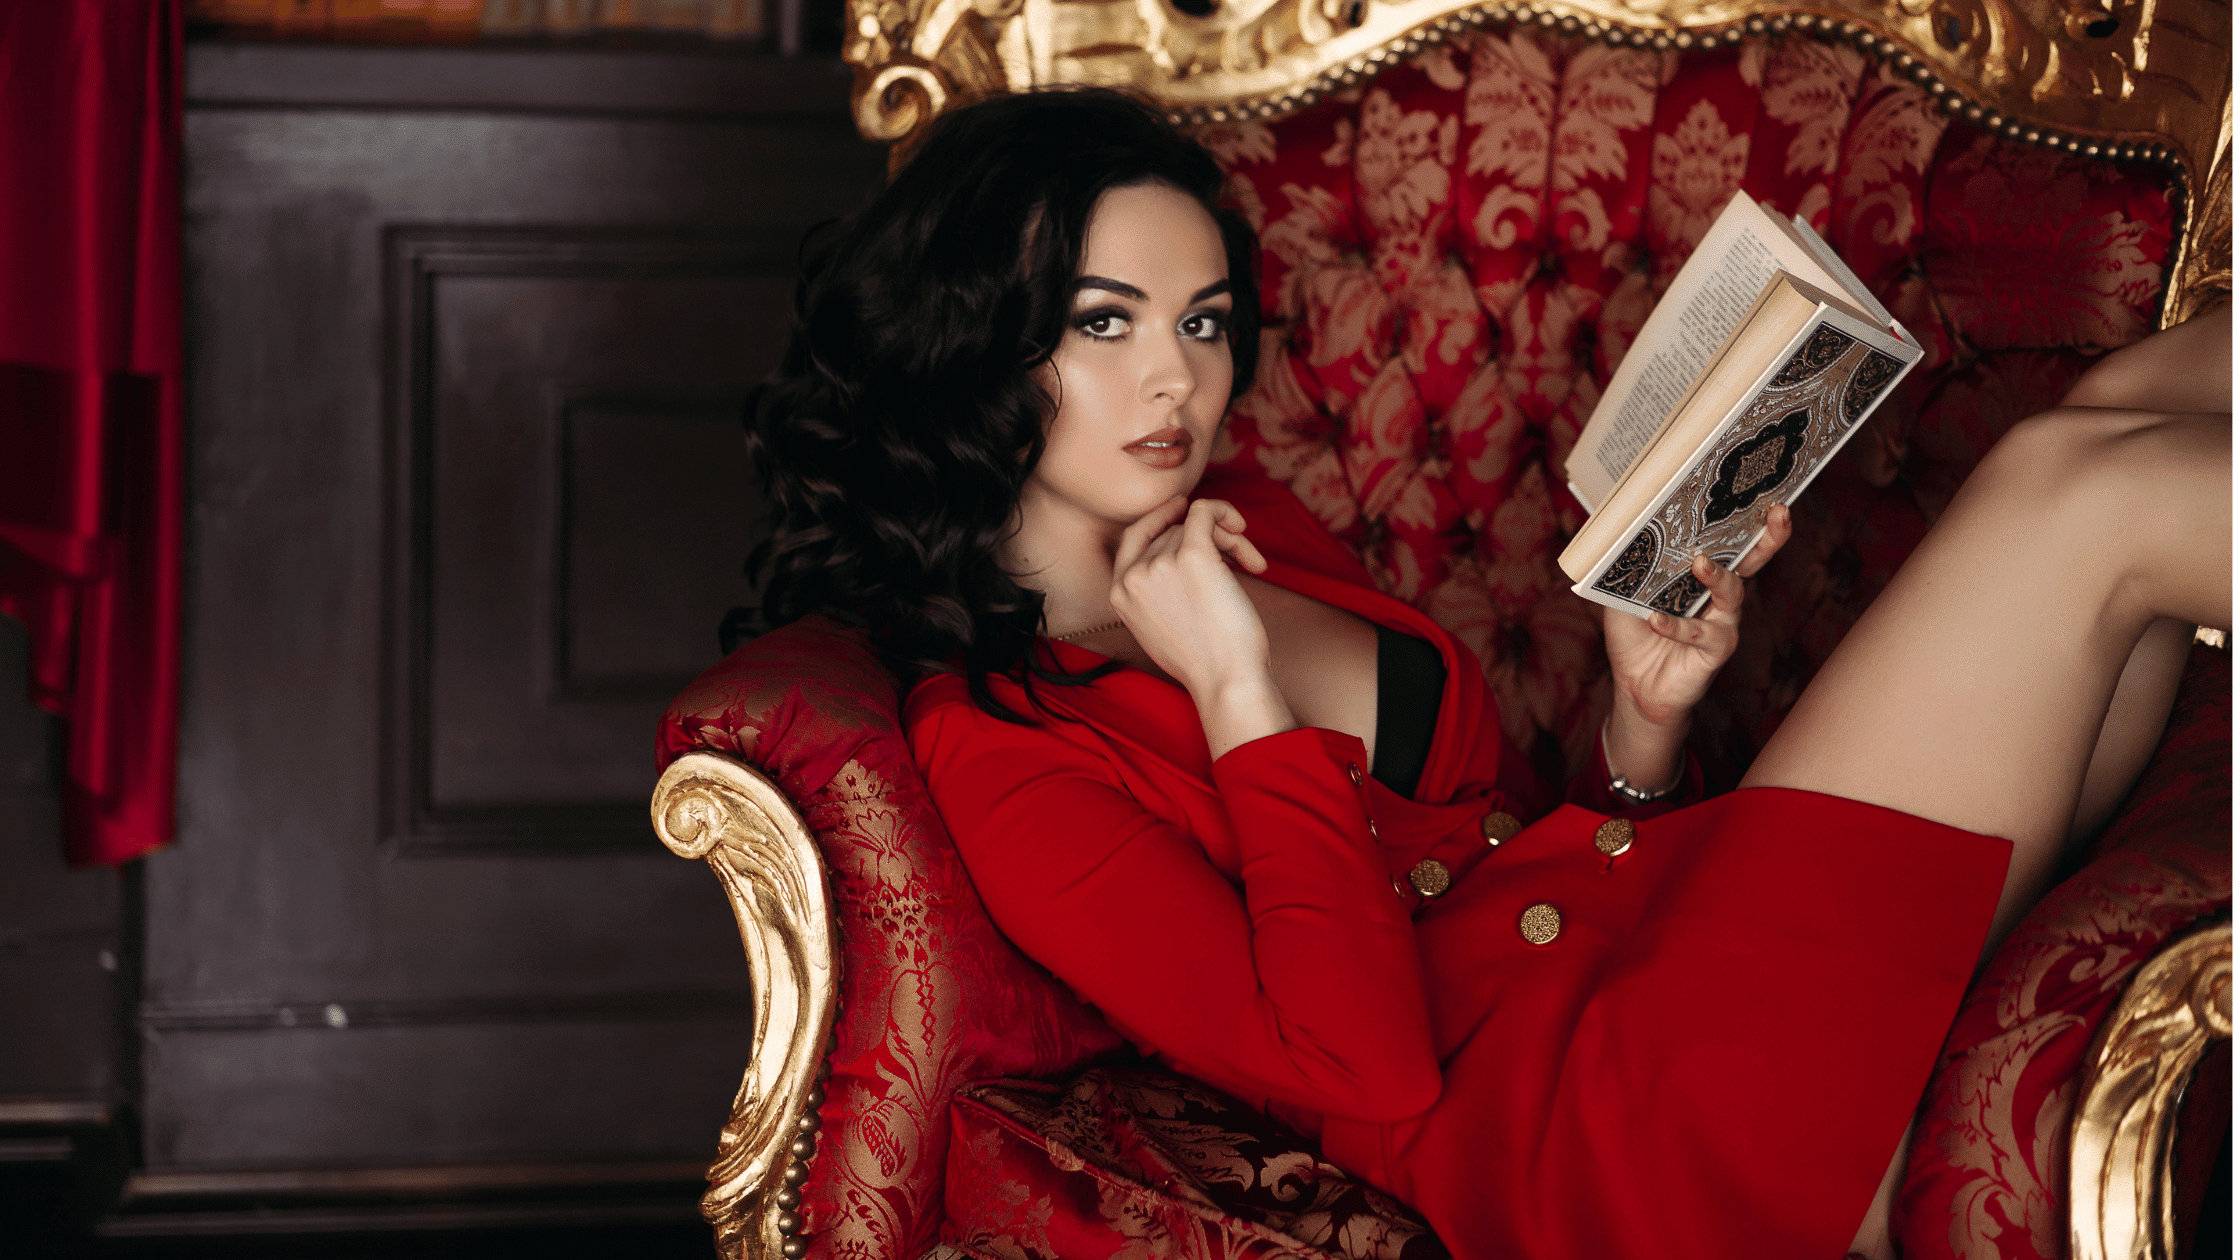 Portrait of girl in short red dress lying on arm chair, holding book in hand